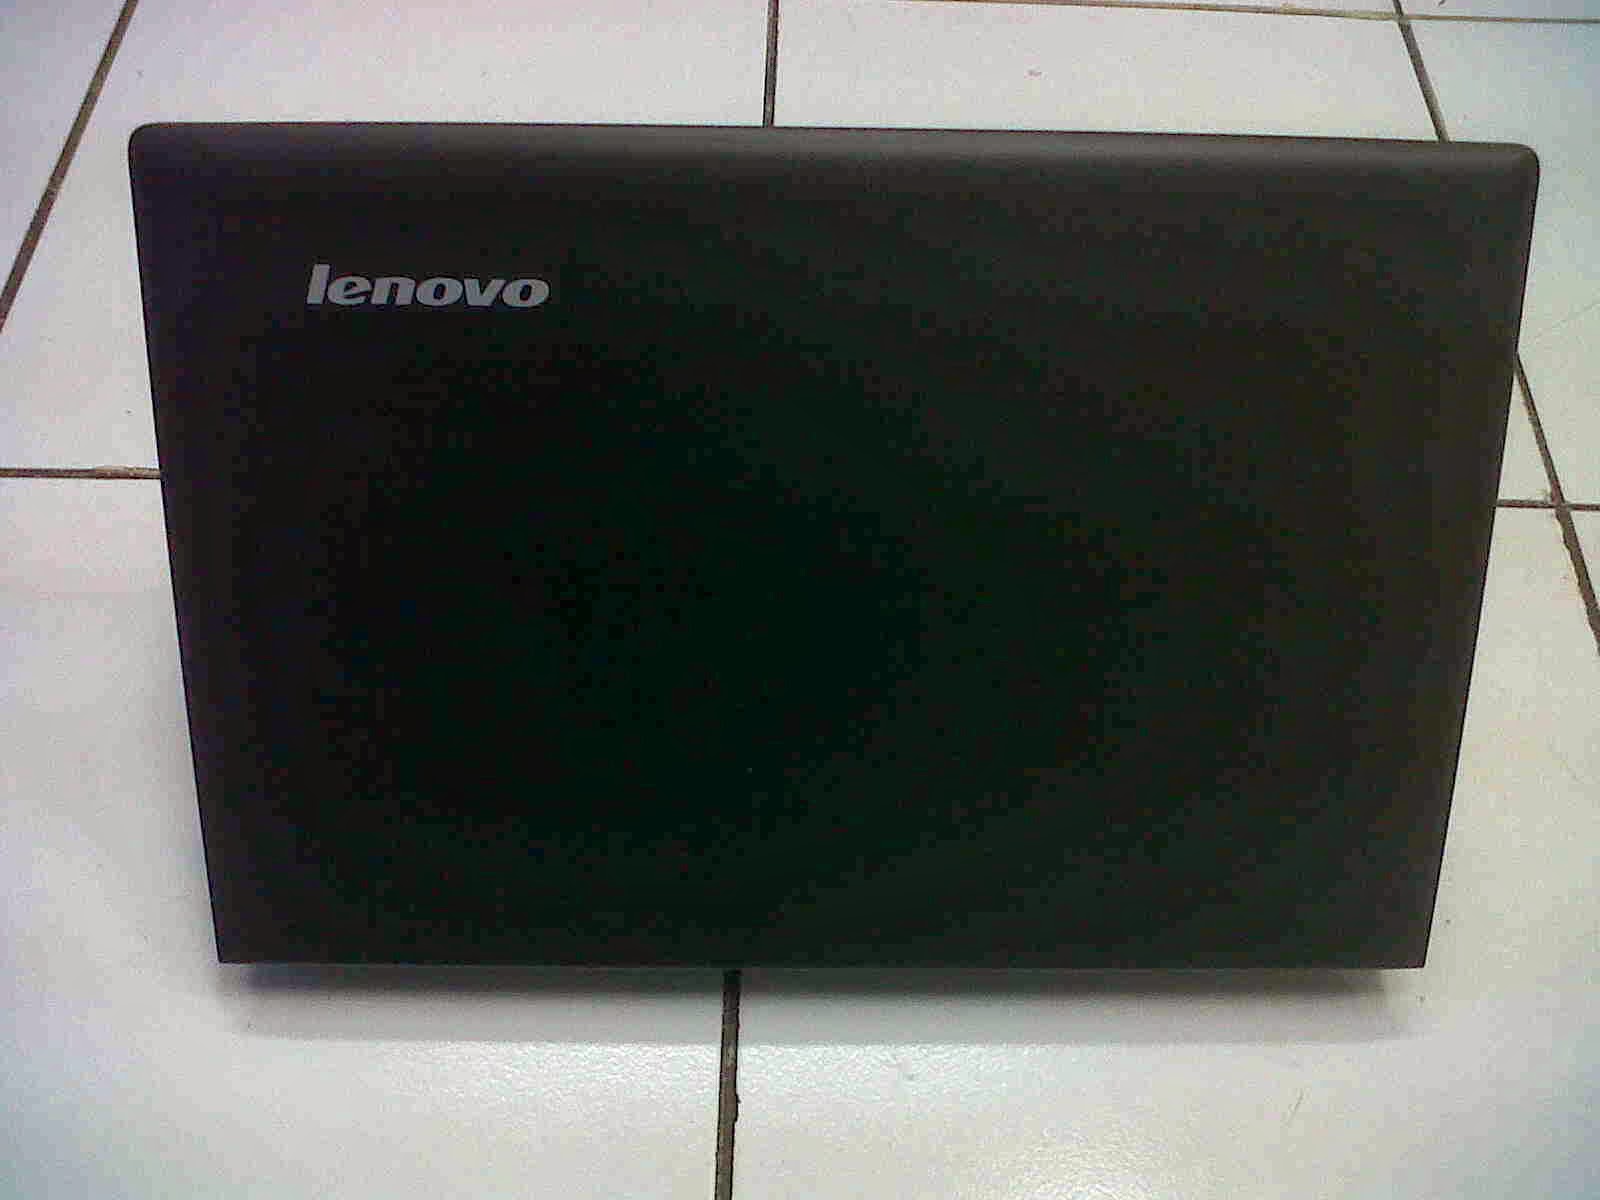 REVIEW: Notebook Lenovo G400 - 5010 &#91;Low Price, High Performance&#93;